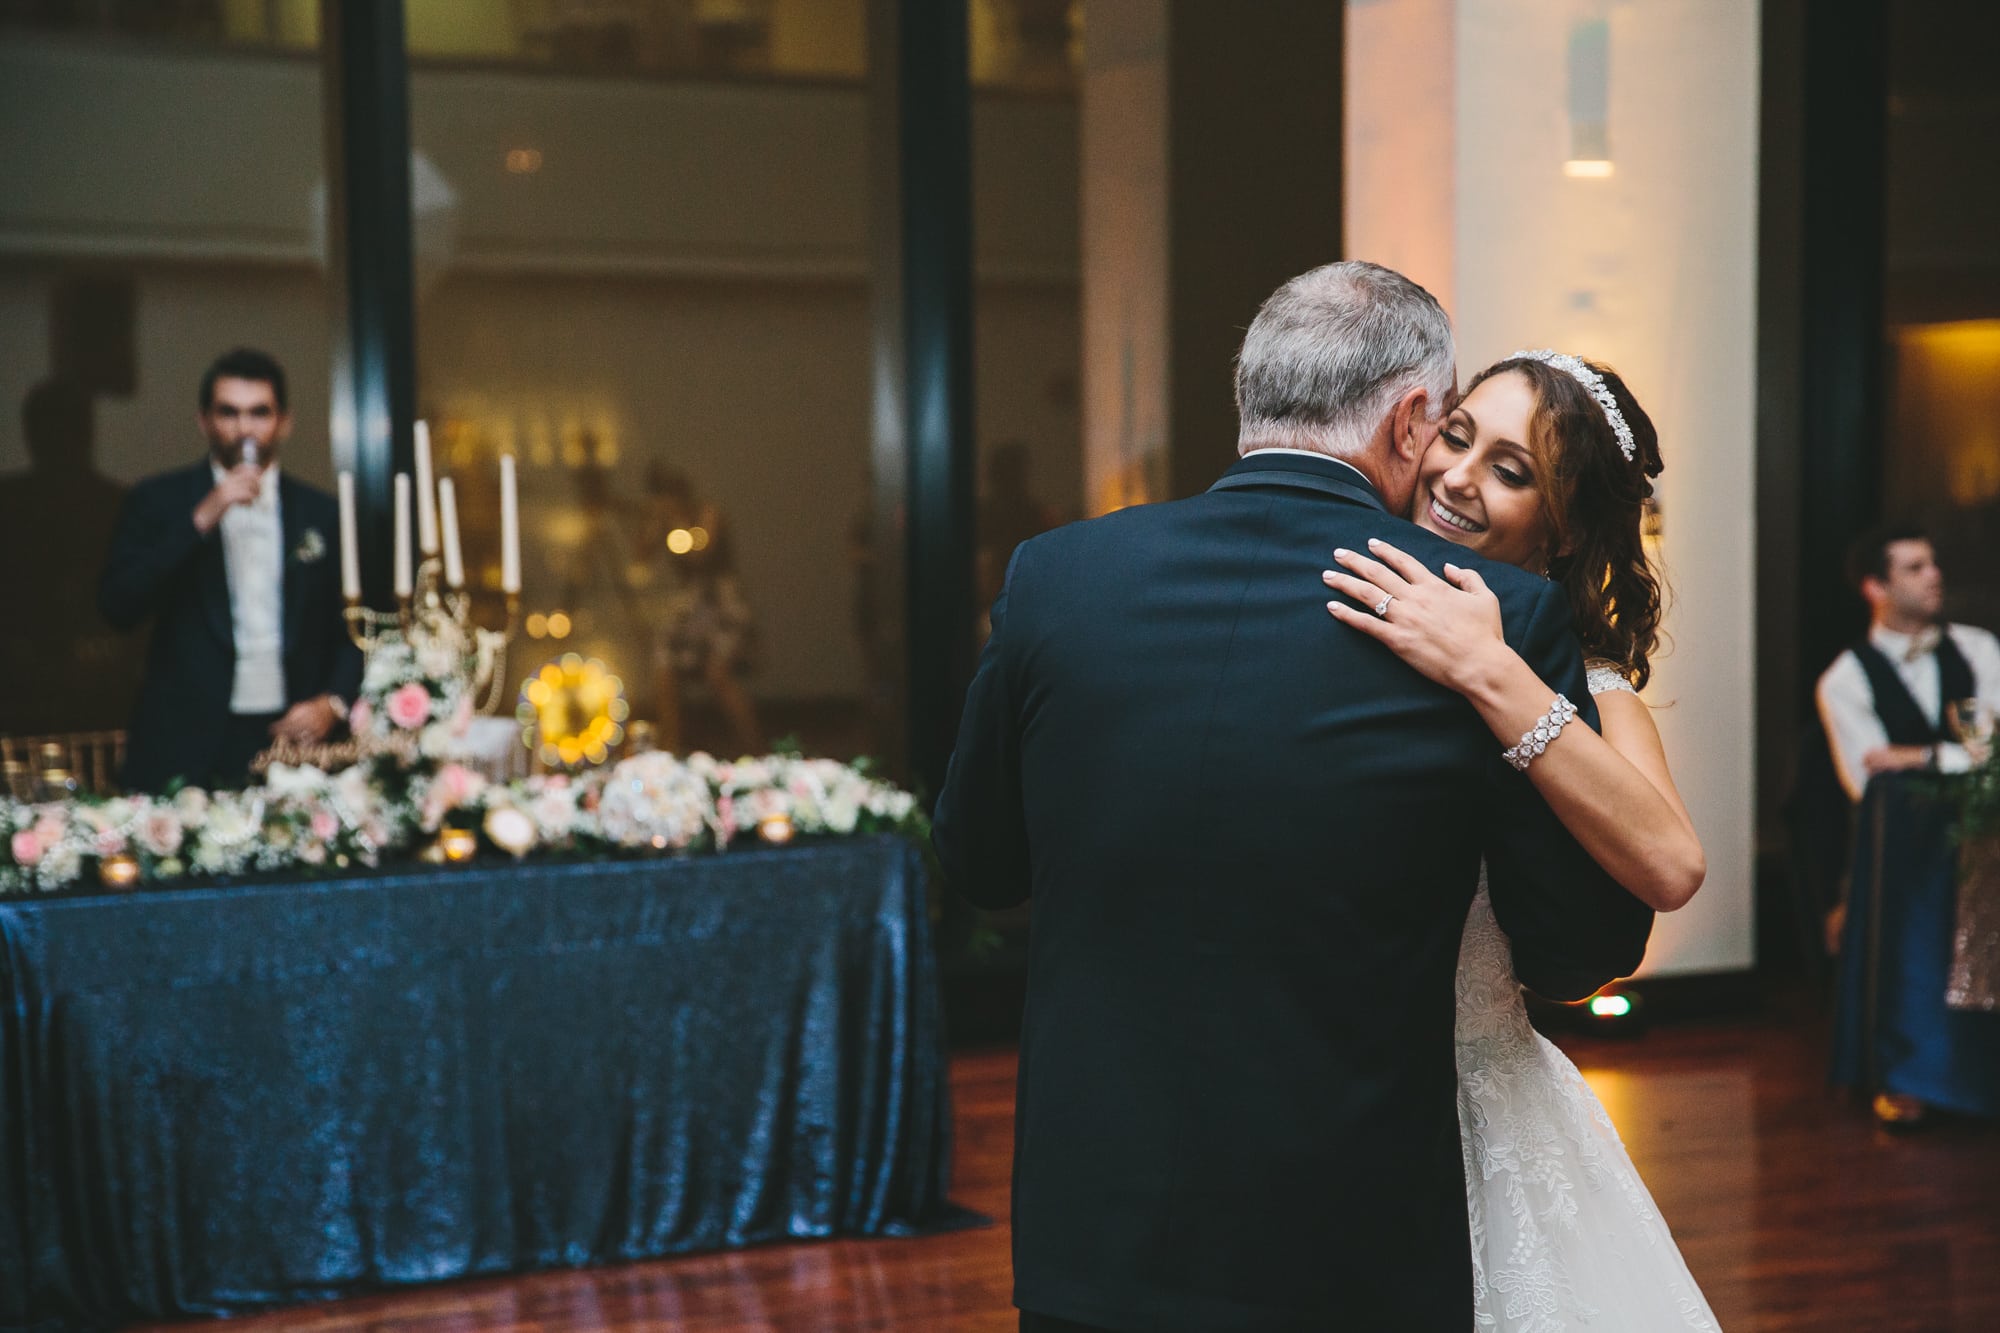 A documentary photograph of a bride dancing with her father during a State Room Wedding in Massachusetts